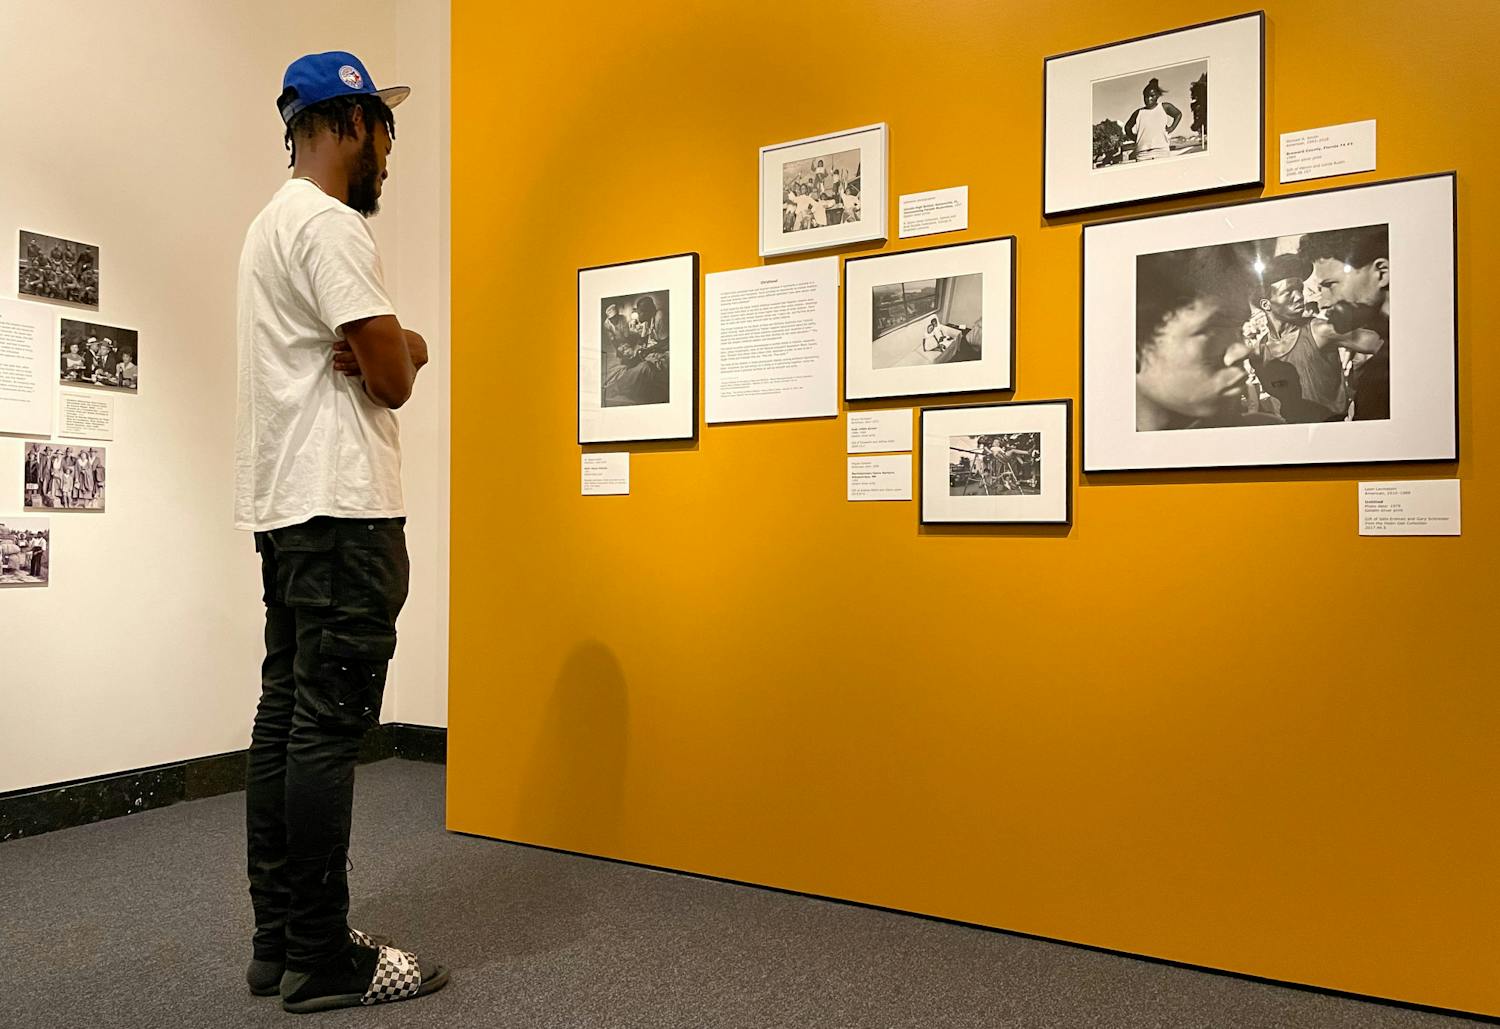 Dolce Douvert, a Gainesville resident looks at photographs in the Harn Museum of Art on Tuesday, July 27, 2021. The photos are part of a new exhibition called Shadow to Substance, which tells African American stories chronologically through historical imagery and modern imagery taken by today’s Black photographers.